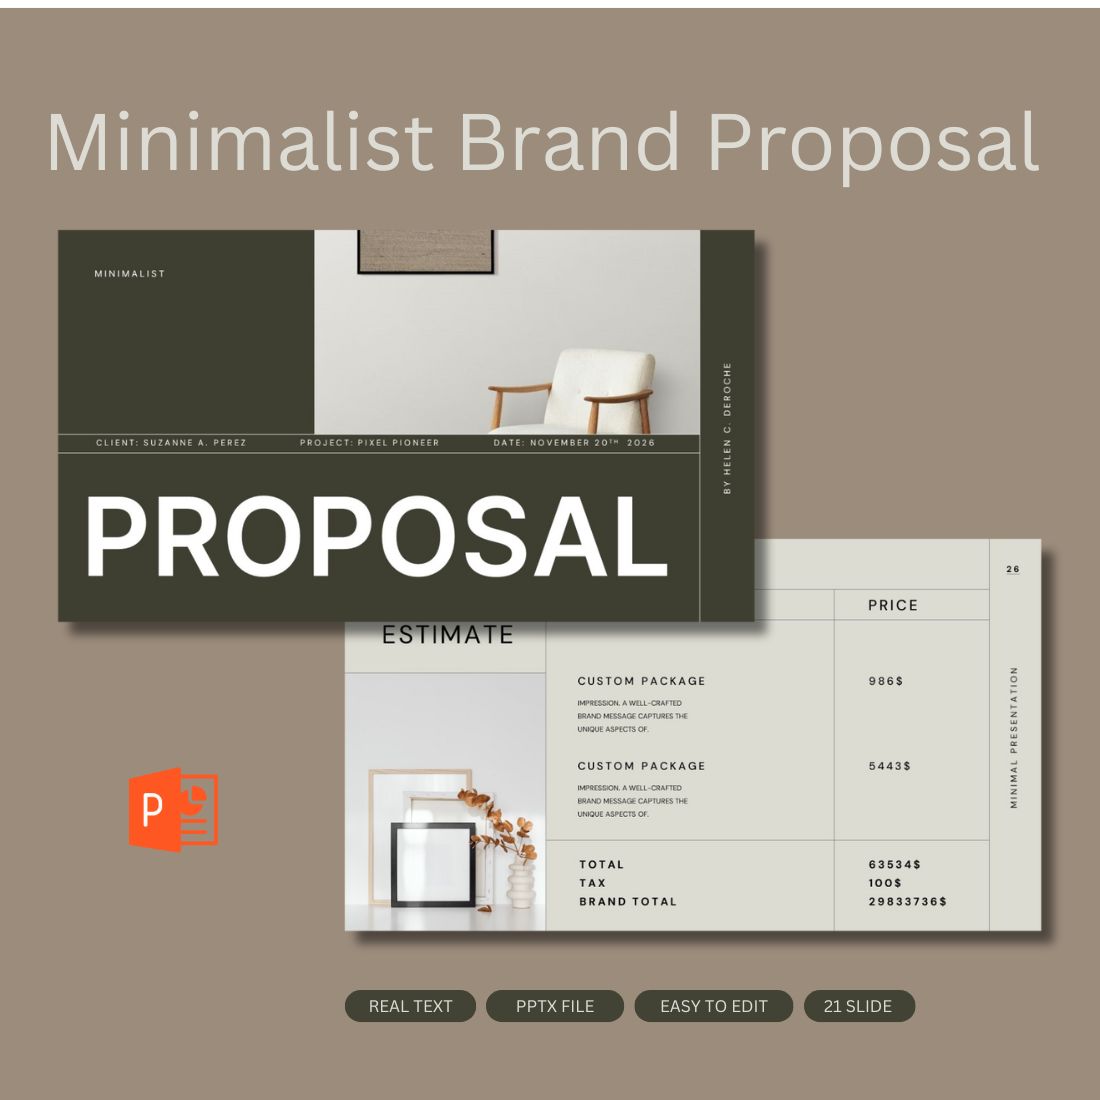 Minimalist Brand Proposal preview image.